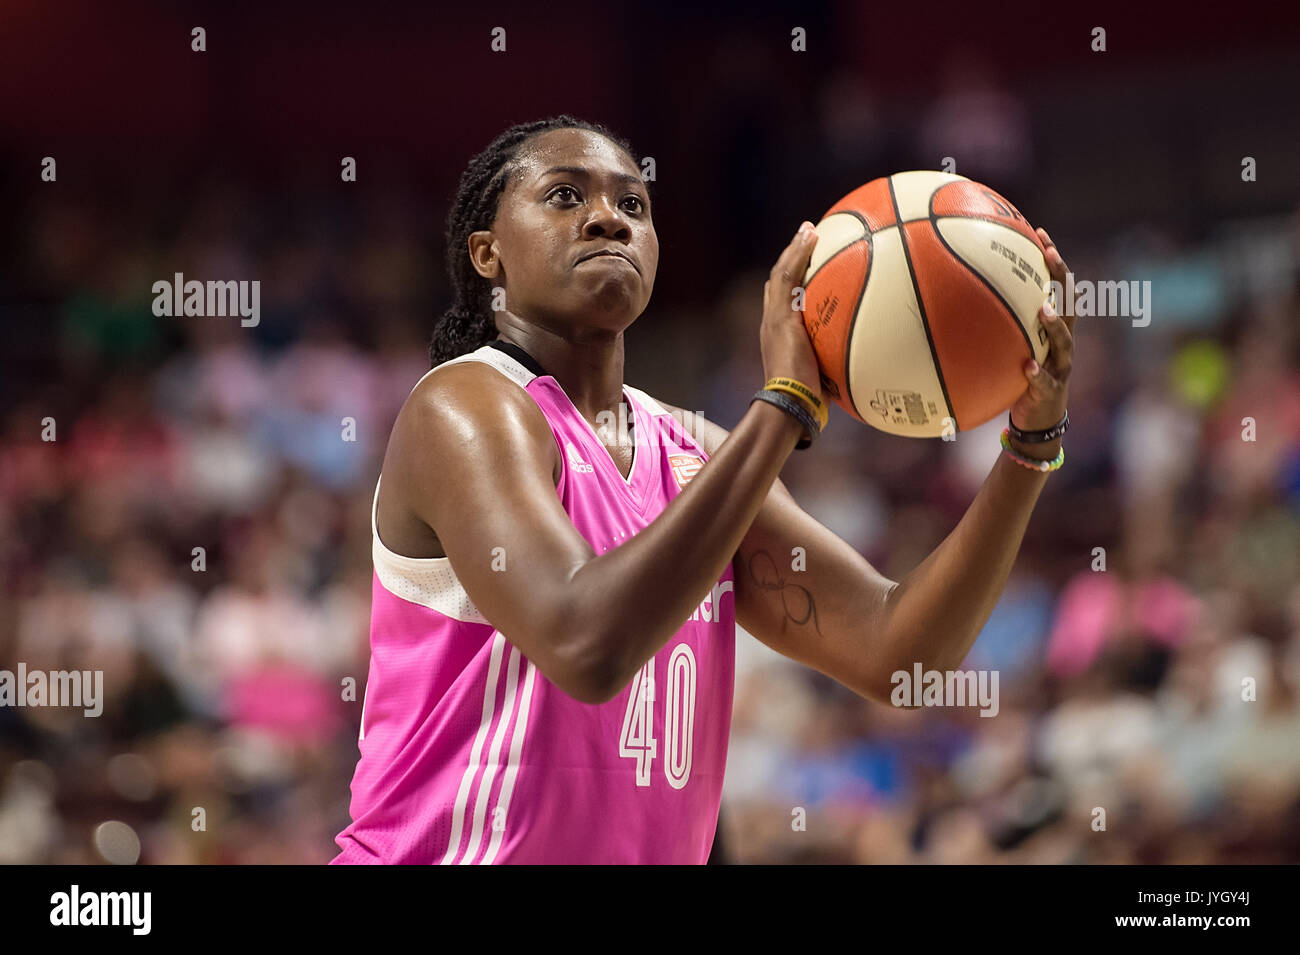 Uncasville, Connecticut, USA. 18 August, 2017. Connecticut Sun guard Shekinna Stricklen (40) at the free throw line during the WNBA basketball game between the New York Liberty and the Connecticut Sun at Mohegan Sun Arena. New York defeated Connecticut 82-70. Chris Poss/Alamy Live News Stock Photo